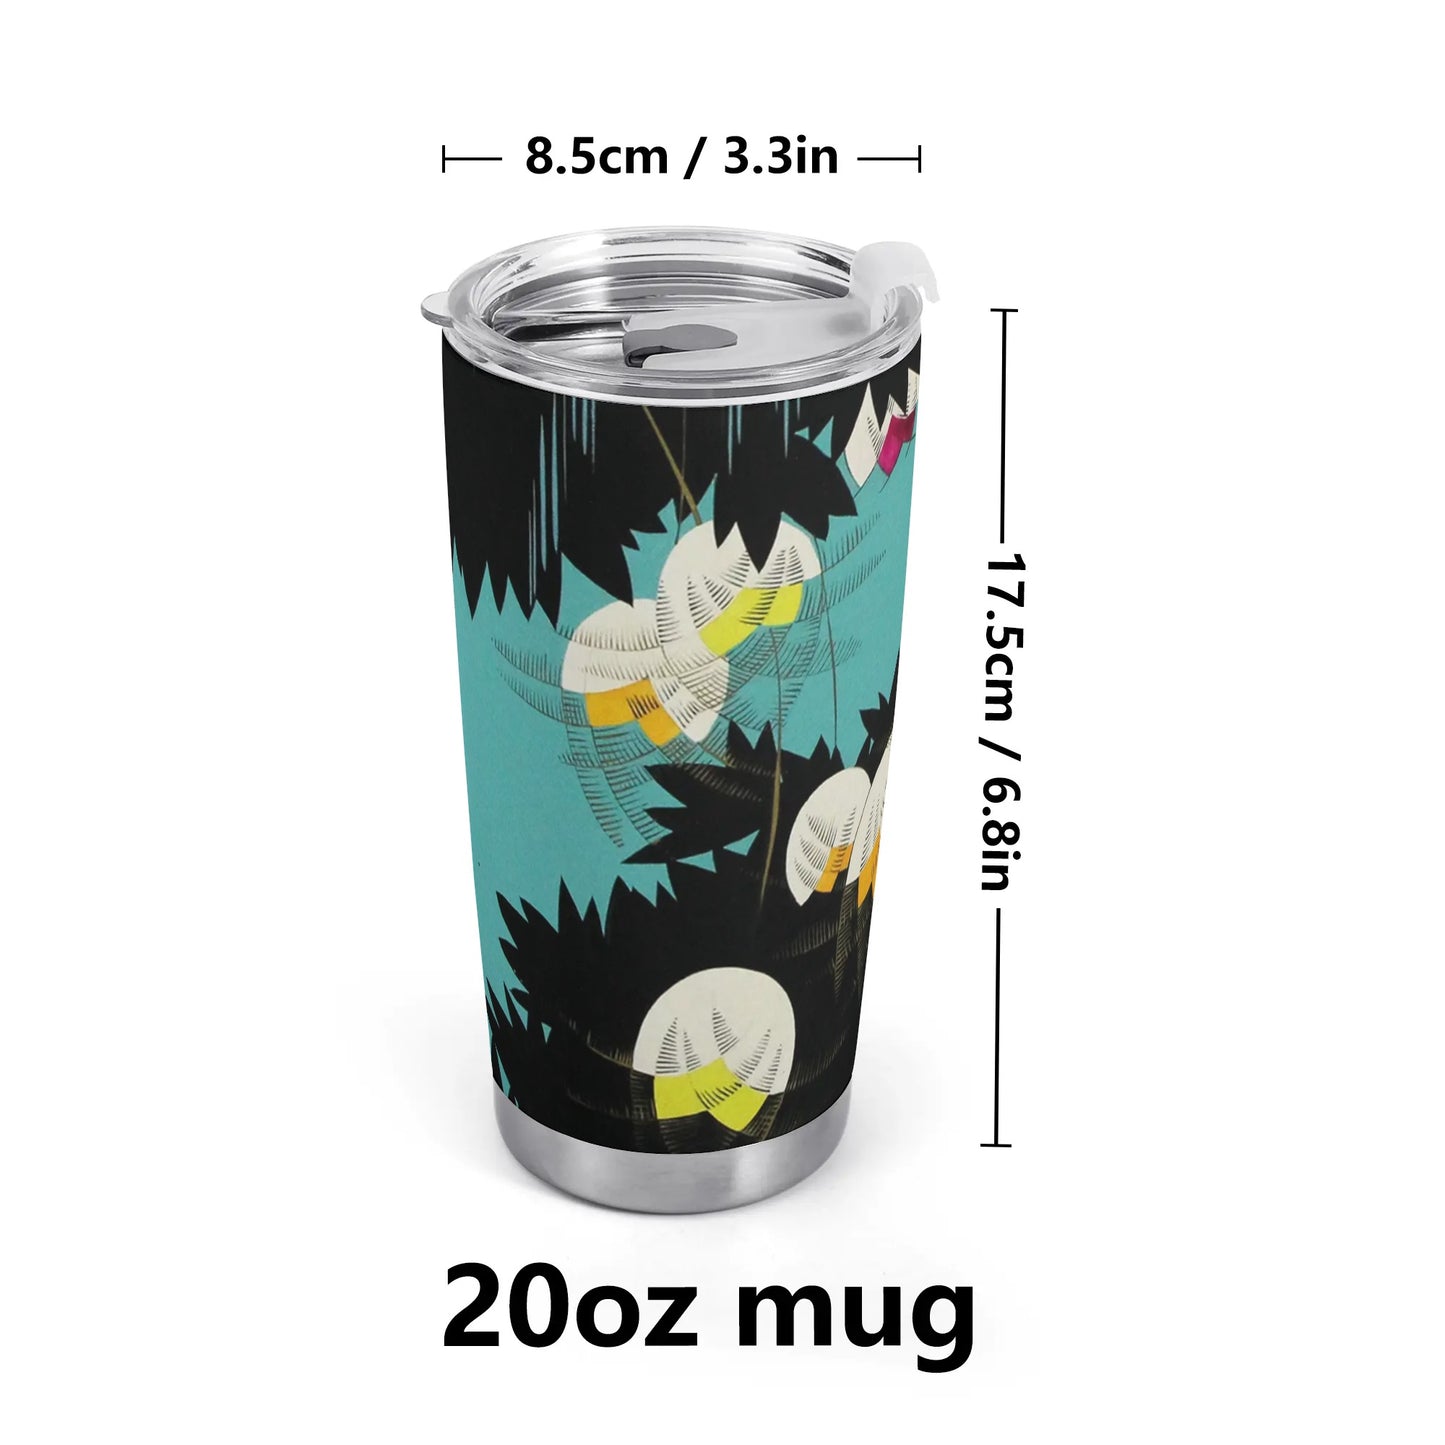 Retro Art Deco Floral Lilly of the Valley Turquoise and Black All Over Print Tumbler 20oz